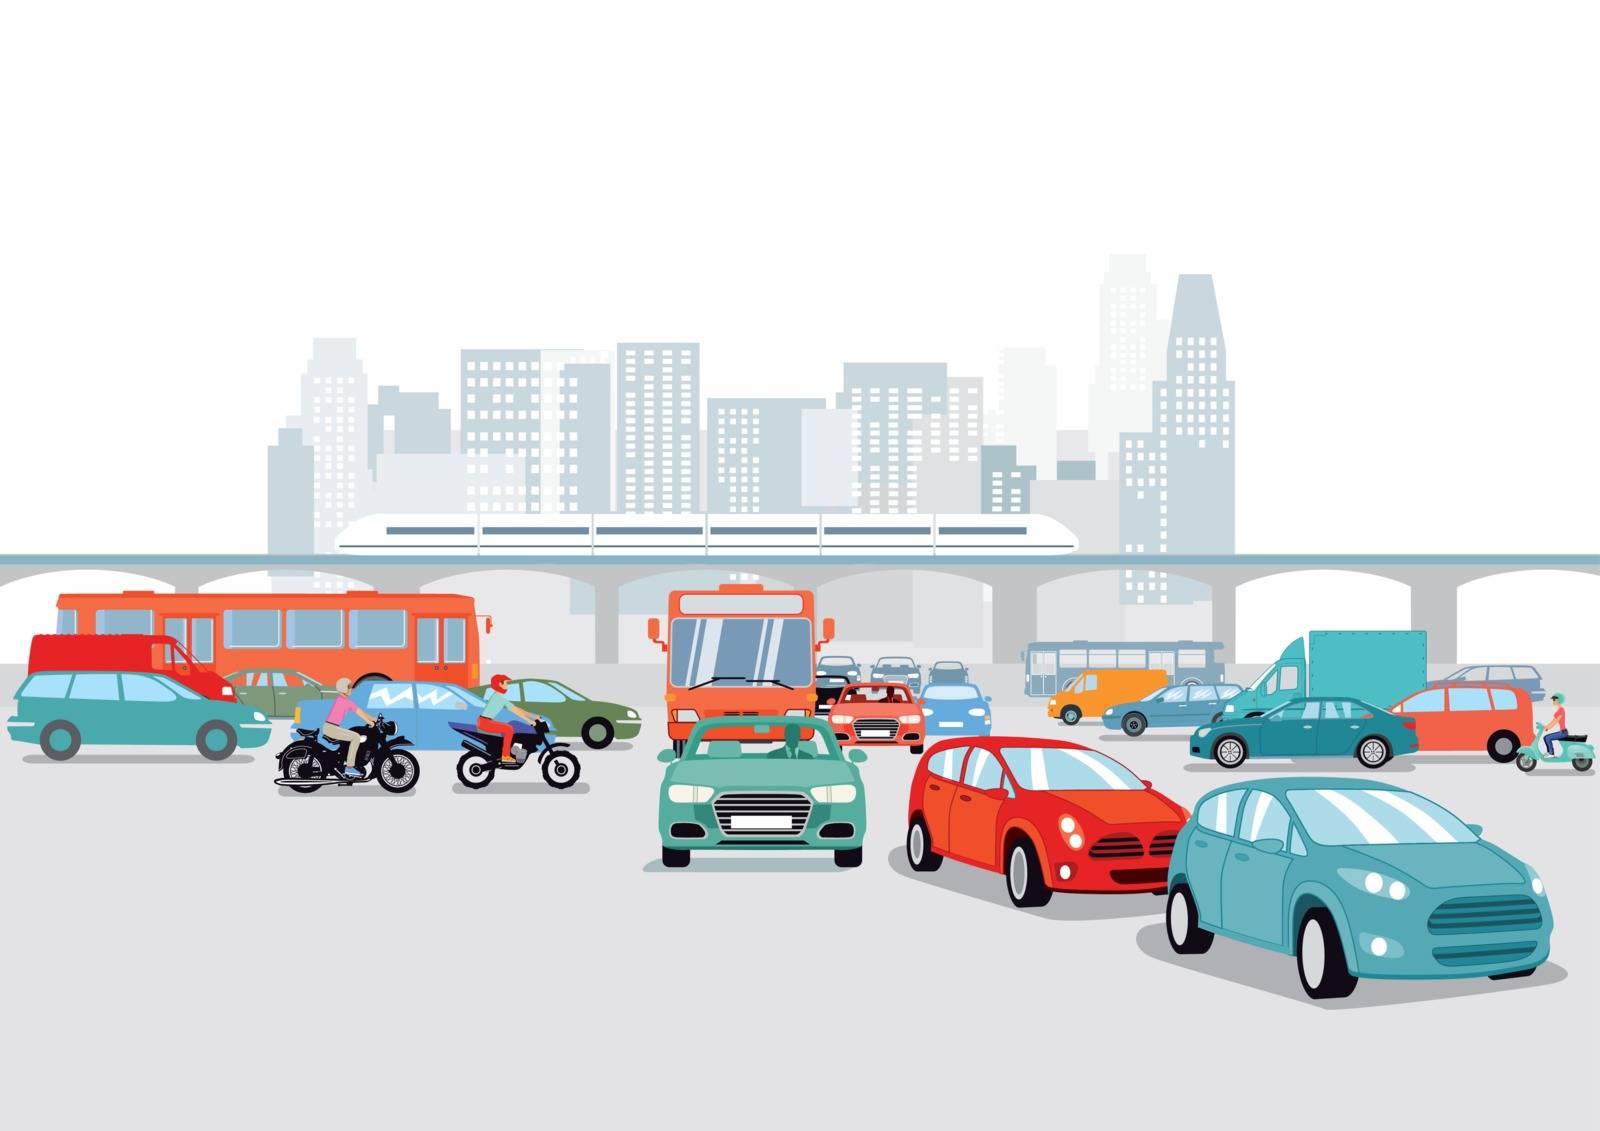 Big city with cars, traffic illustration by scusi